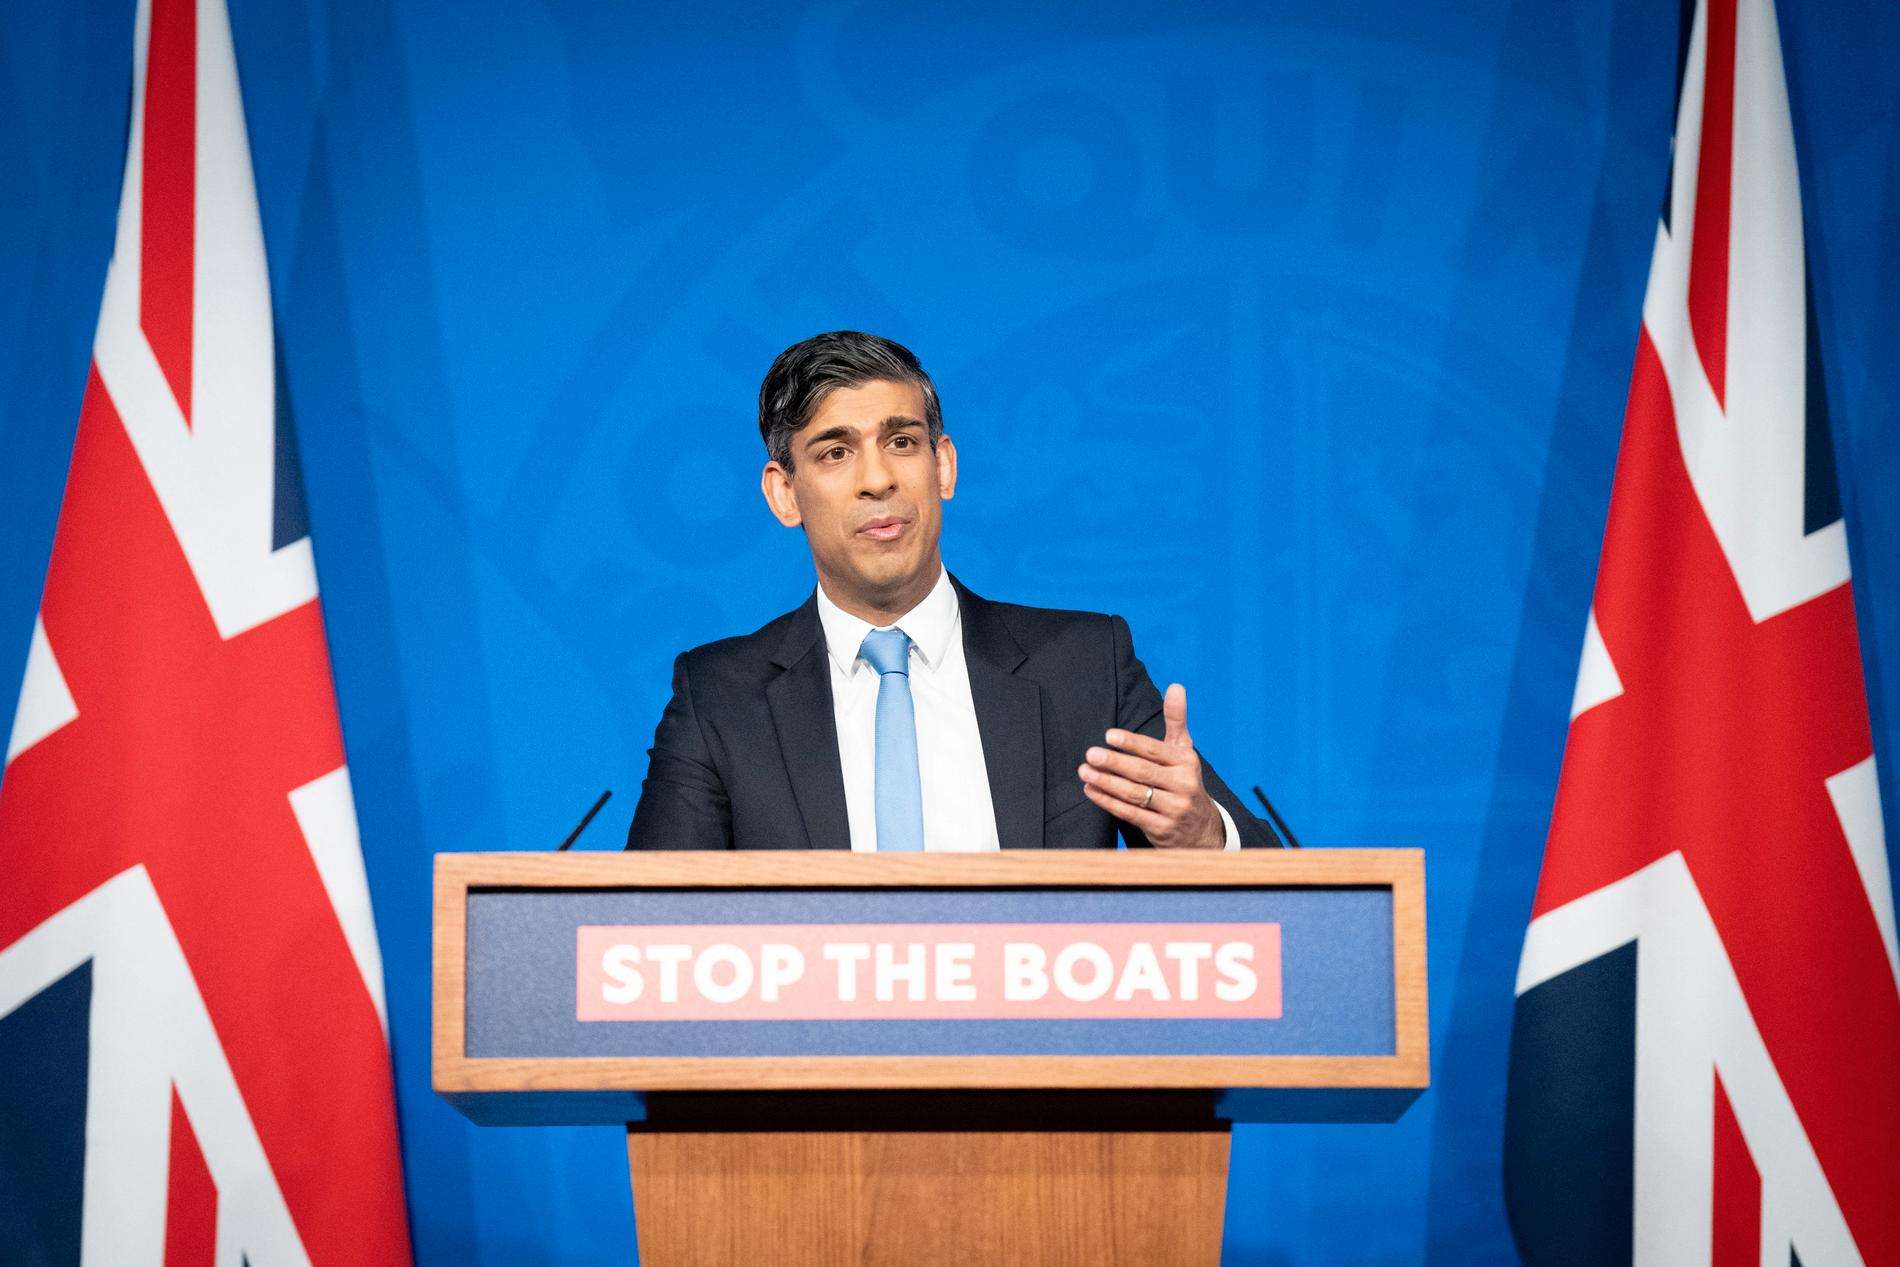 WATERPROOF: Rishi Sunak has won approval for a controversial plan to stop boats carrying migrants across the English Channel.  Migrants should be intimidated with threats of deportation to Africa. 